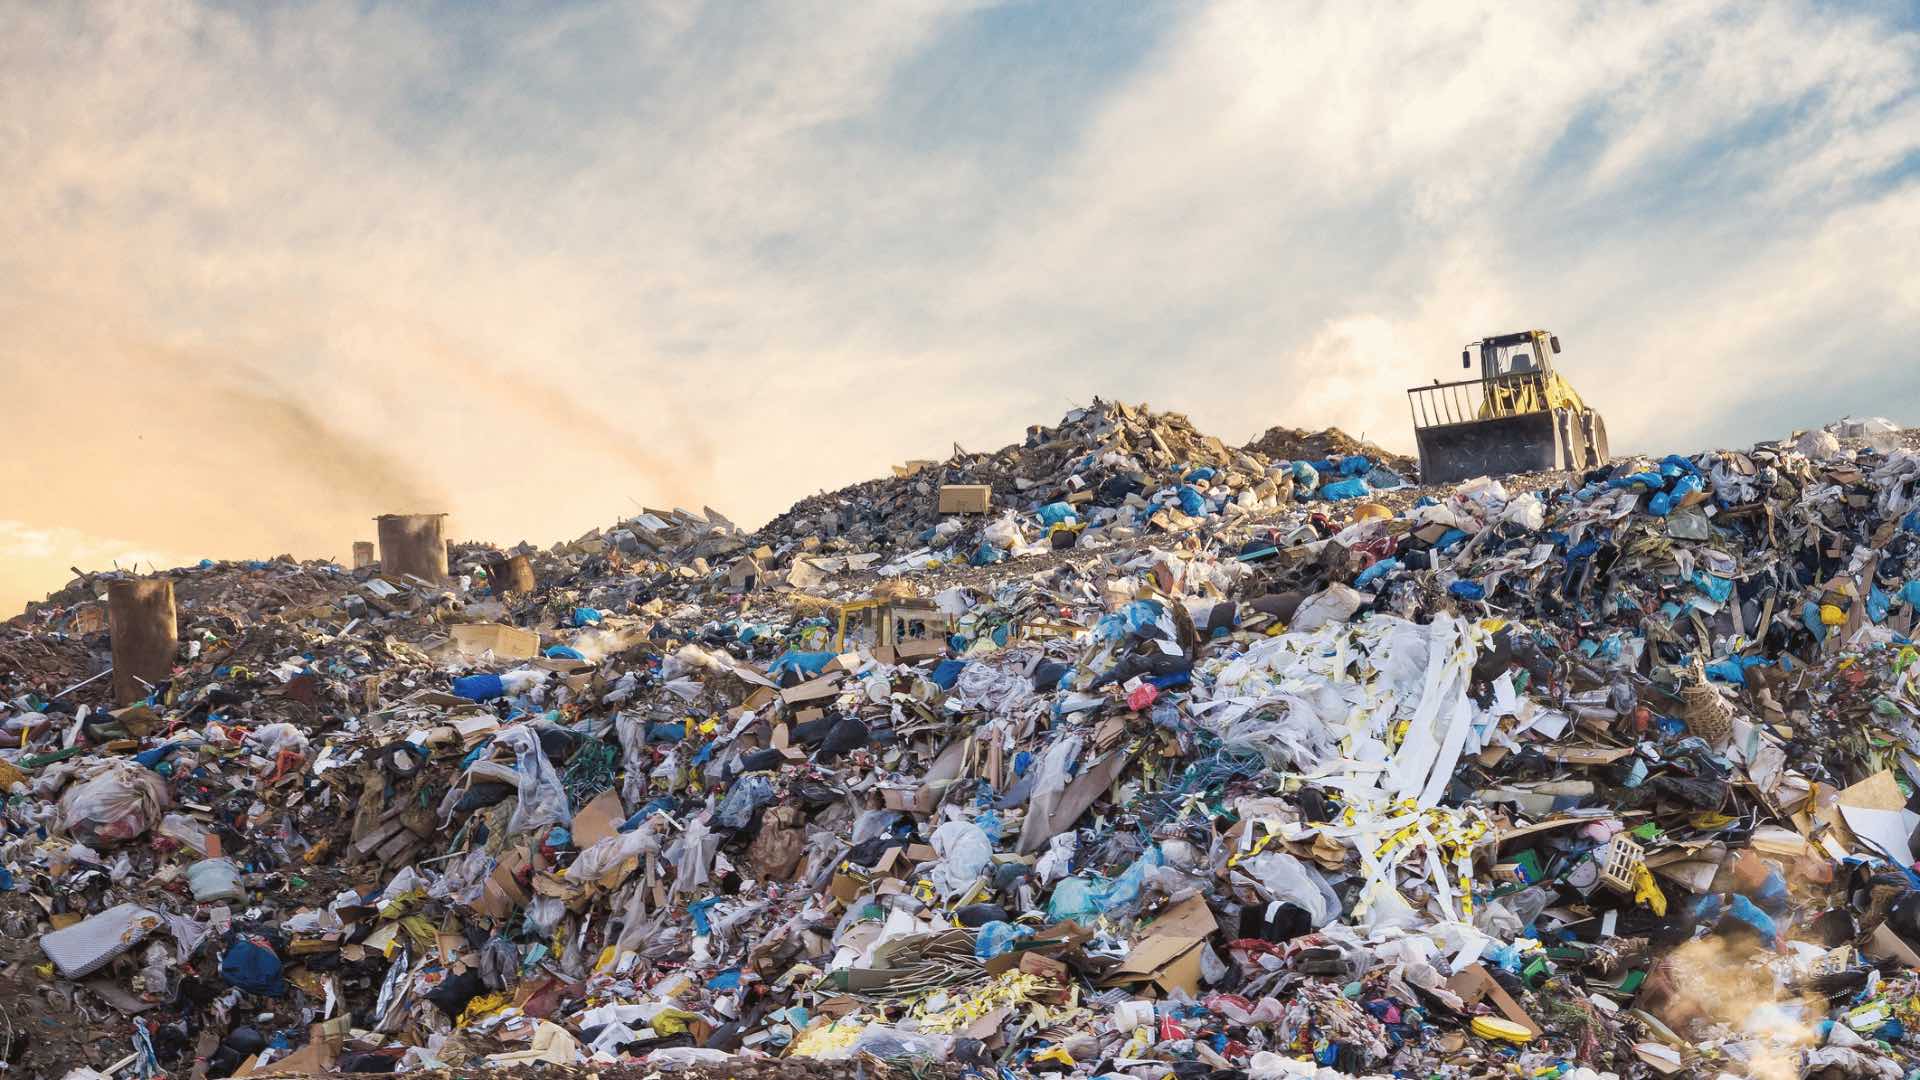 Photo of a huge pile of rubbish in landfill.